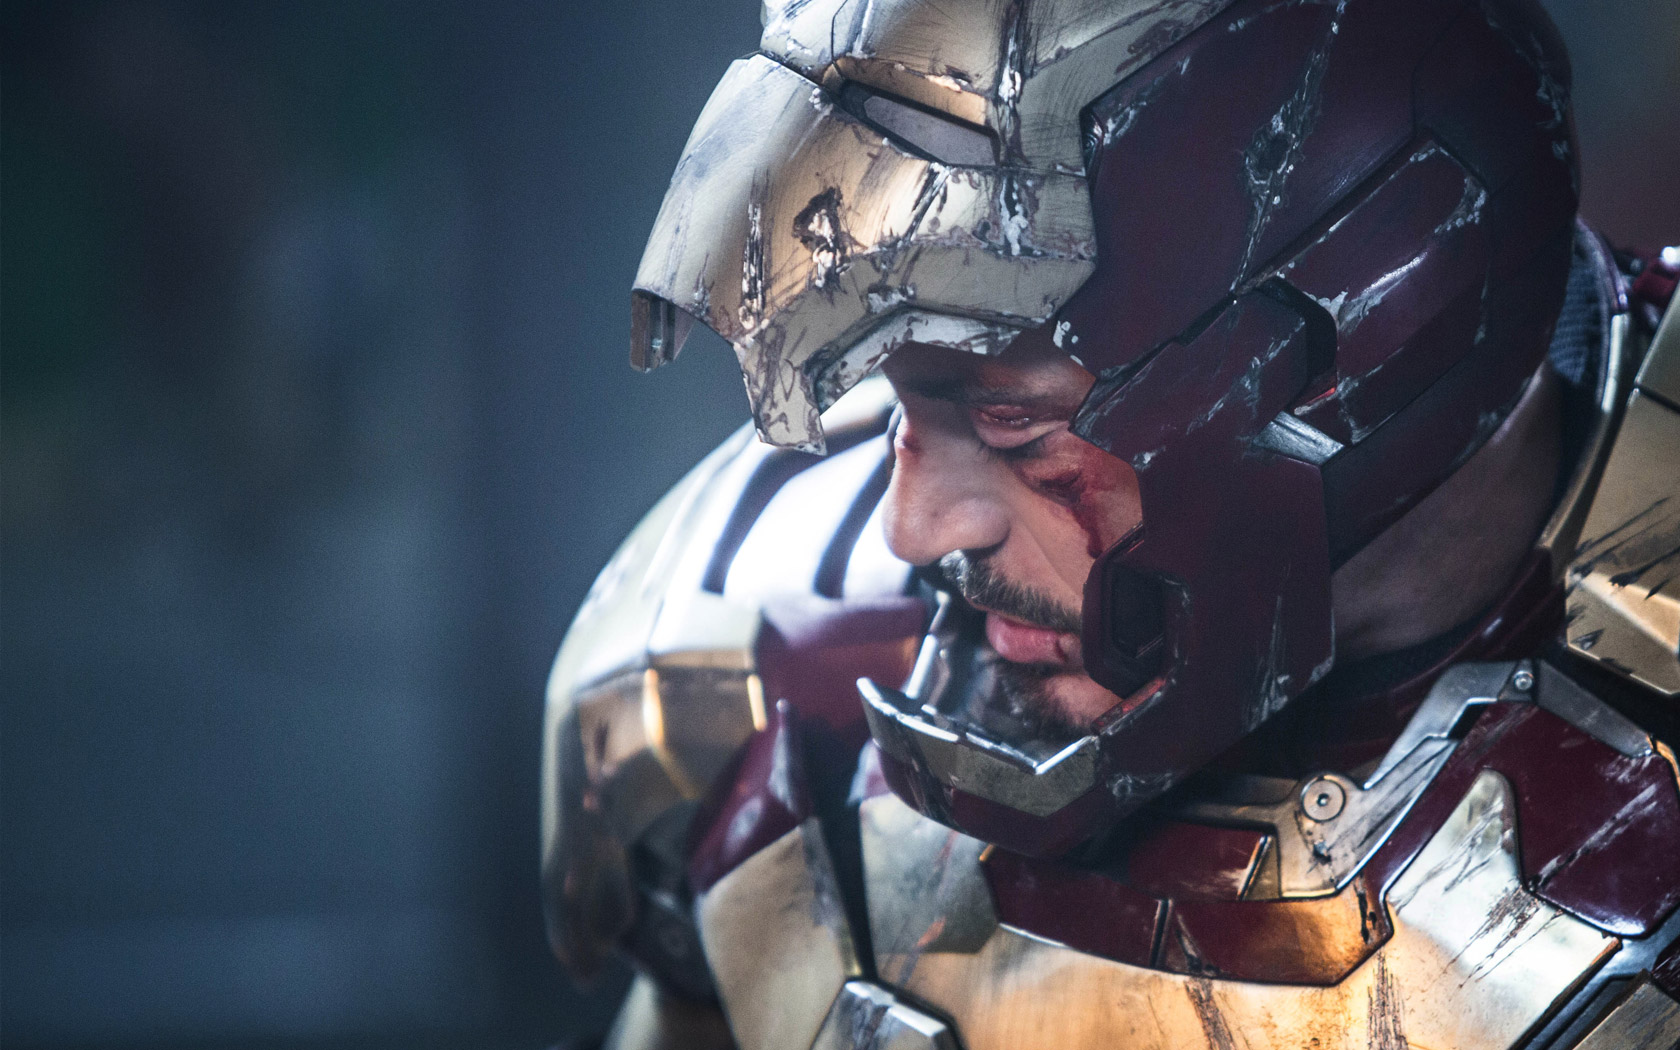 iron man hd wallpapers,helmet,personal protective equipment,sports gear,fictional character,american football